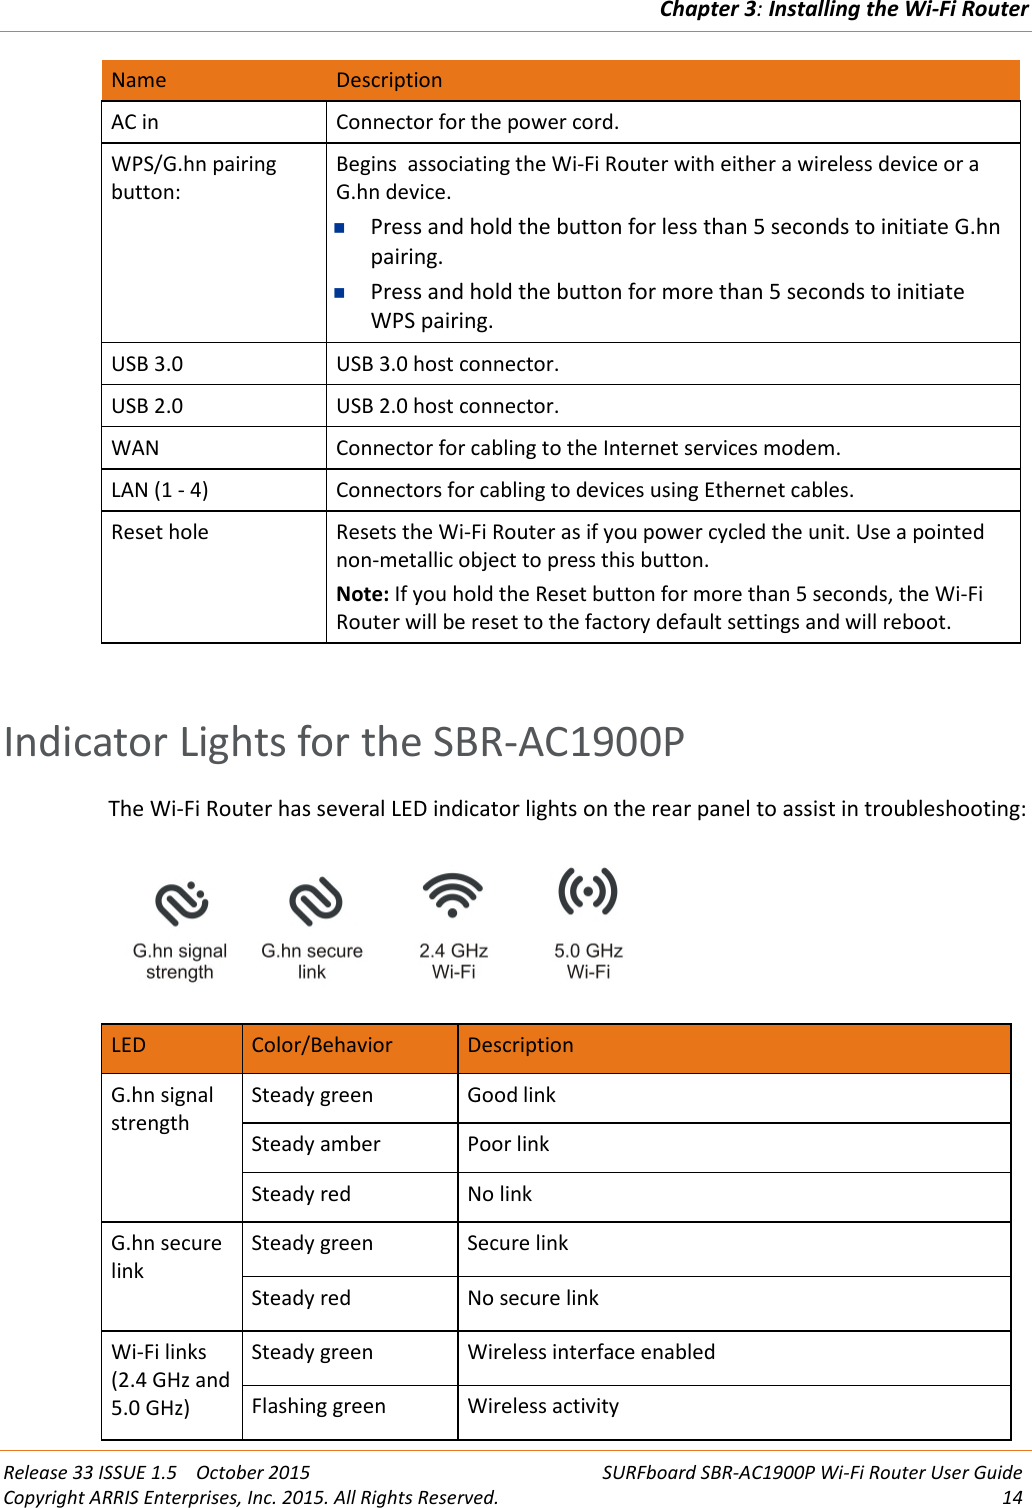 Chapter 3:Installing the Wi-Fi RouterRelease 33 ISSUE 1.5 October 2015 SURFboard SBR-AC1900P Wi-Fi Router User GuideCopyright ARRIS Enterprises, Inc. 2015. All Rights Reserved. 14Name DescriptionAC in Connector for the power cord.WPS/G.hn pairingbutton:Begins associating the Wi-Fi Router with either a wireless device or aG.hn device.Press and hold the button for less than 5 seconds to initiate G.hnpairing.Press and hold the button for more than 5 seconds to initiateWPS pairing.USB 3.0 USB 3.0 host connector.USB 2.0 USB 2.0 host connector.WAN Connector for cabling to the Internet services modem.LAN (1 - 4) Connectors for cabling to devices using Ethernet cables.Reset hole Resets the Wi-Fi Router as if you power cycled the unit. Use a pointednon-metallic object to press this button.Note: If you hold the Reset button for more than 5 seconds, the Wi-FiRouter will be reset to the factory default settings and will reboot.Indicator Lights for the SBR-AC1900PThe Wi-Fi Router has several LED indicator lights on the rear panel to assist in troubleshooting:LED Color/Behavior DescriptionG.hn signalstrengthSteady green Good linkSteady amber Poor linkSteady red No linkG.hn securelinkSteady green Secure linkSteady red No secure linkWi-Fi links(2.4 GHz and5.0 GHz)Steady green Wireless interface enabledFlashing green Wireless activity